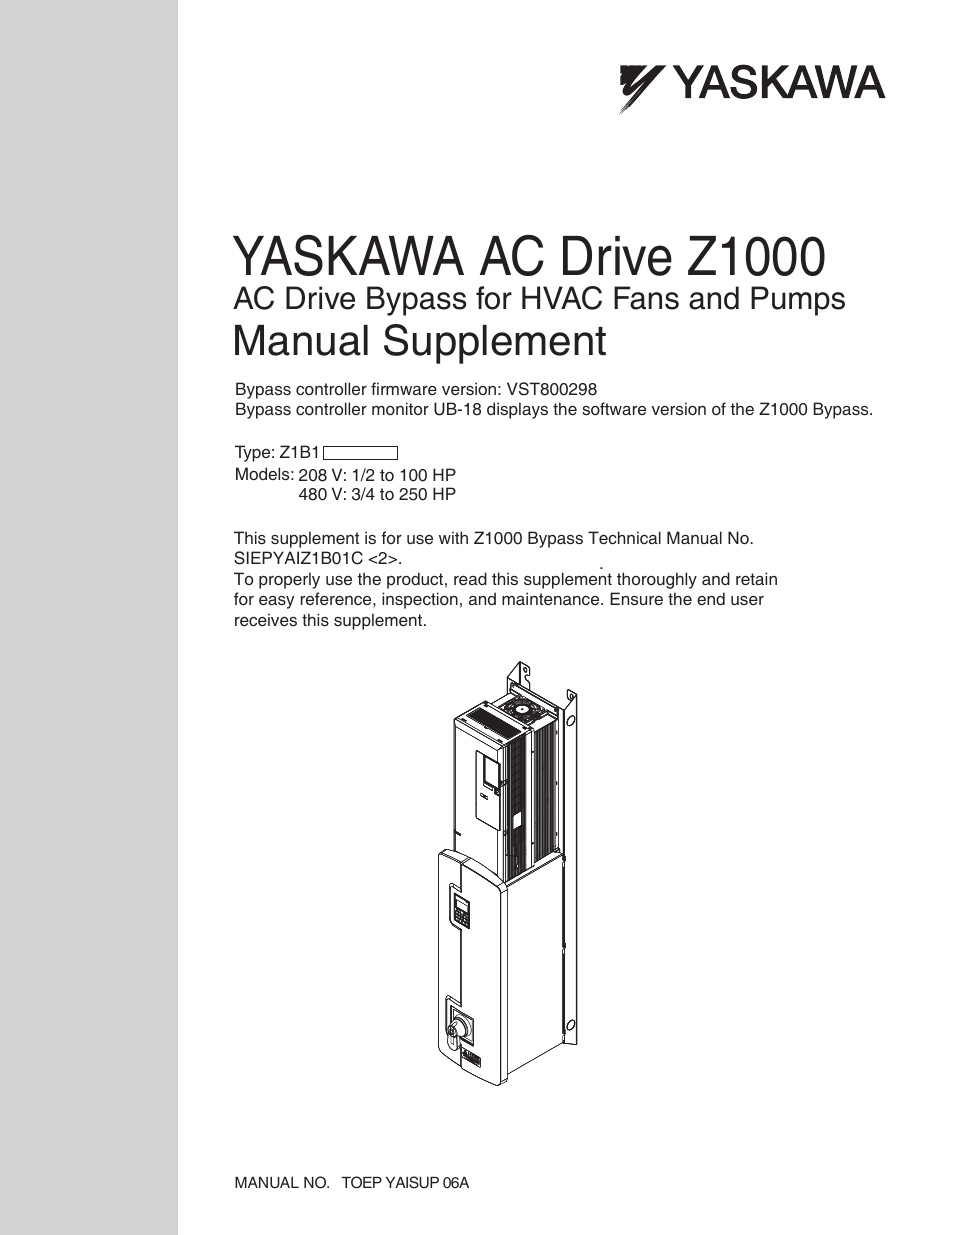 AC Drive Z1000 AC Drive Bypass for HVAC